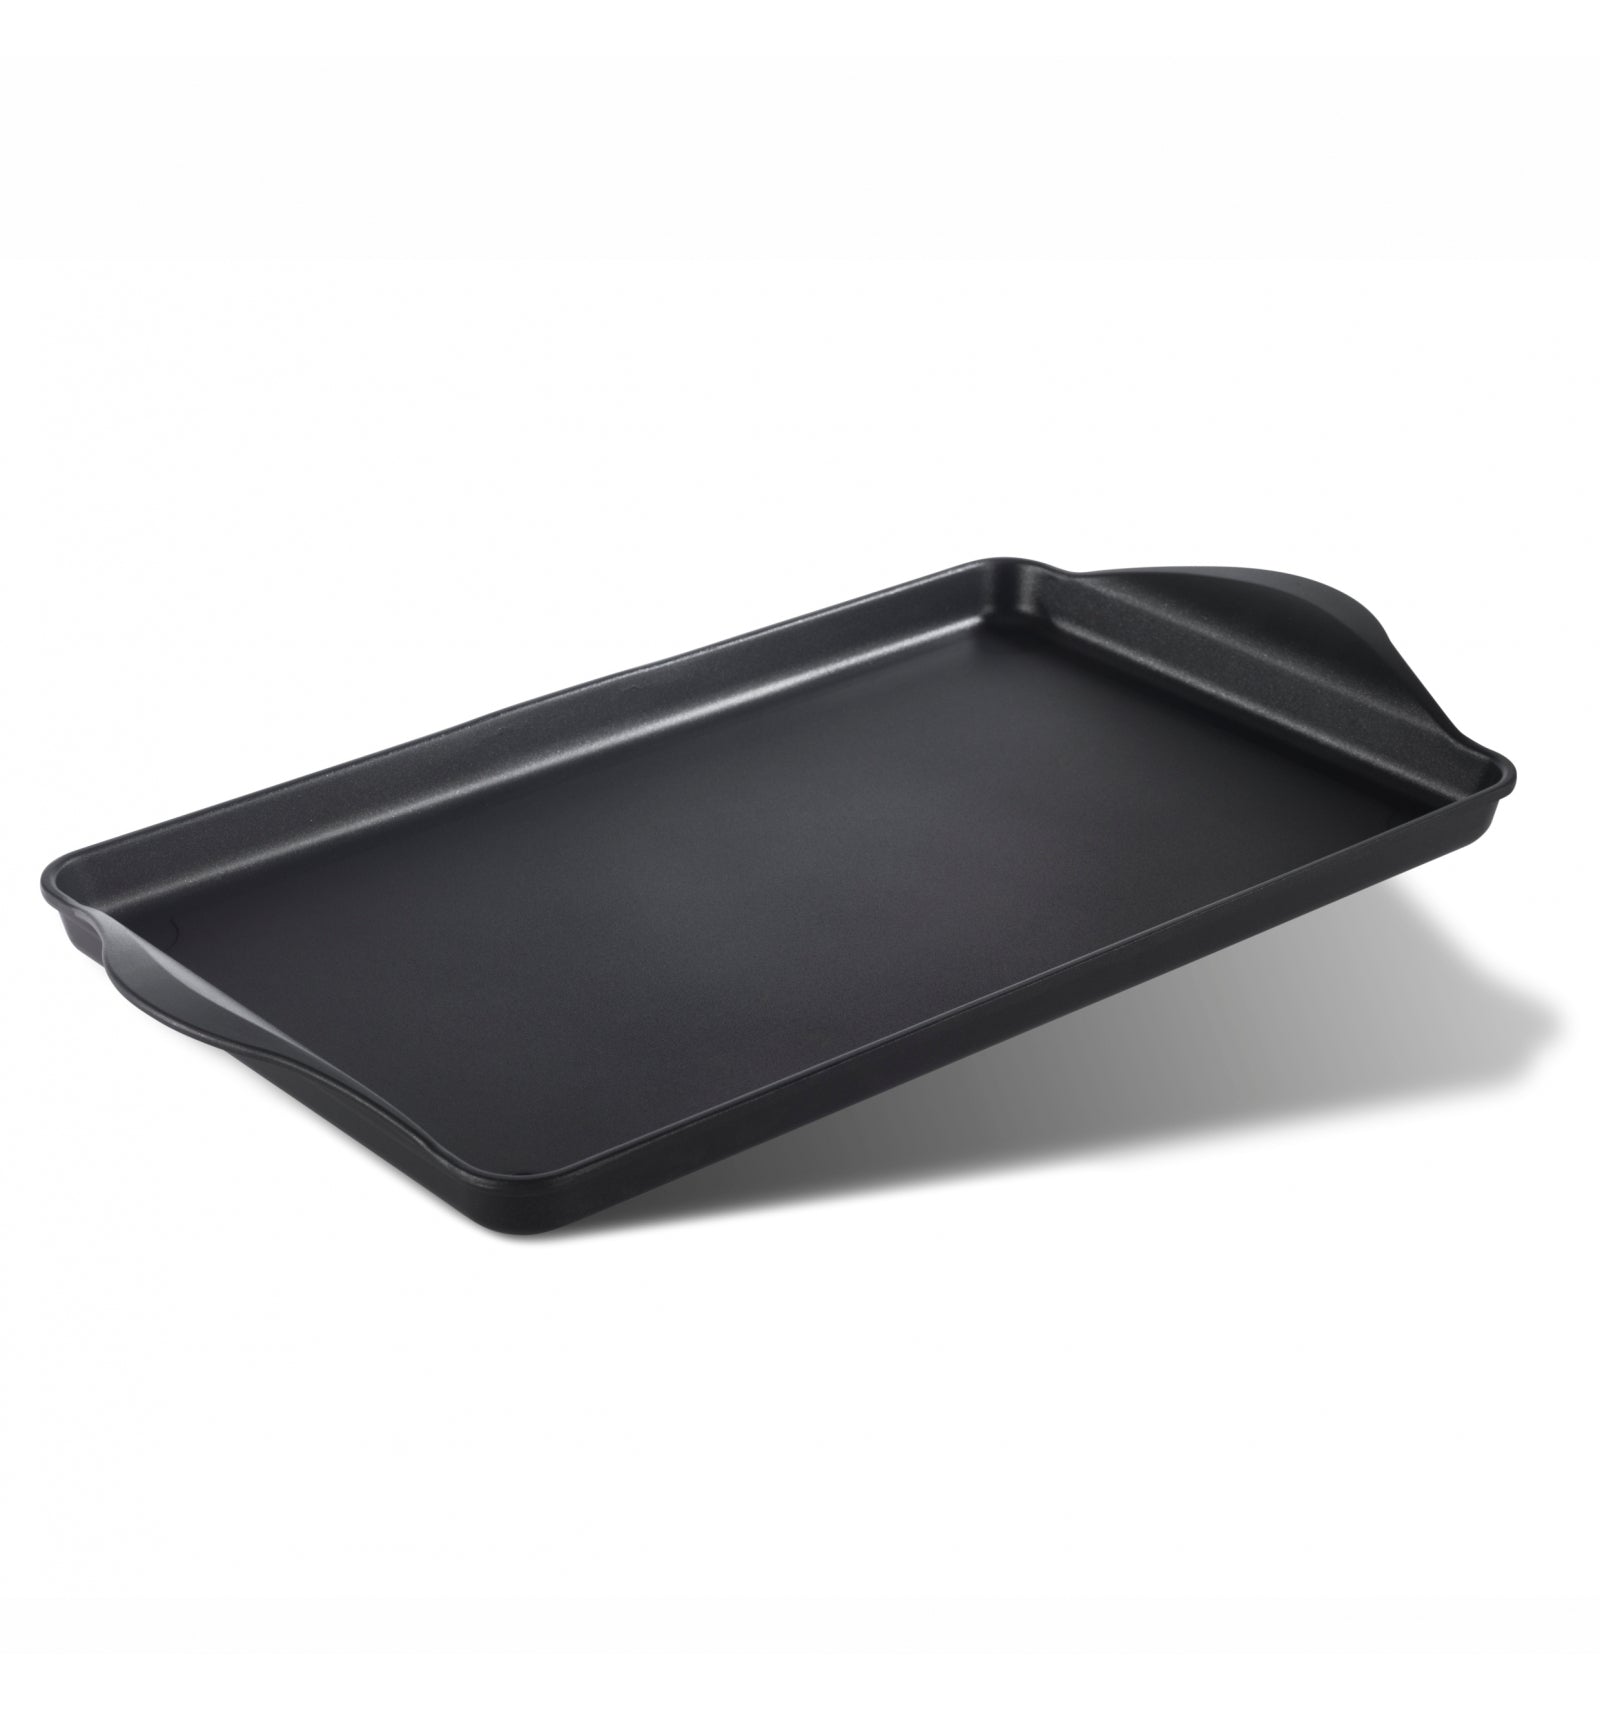 Pujadas Hot-Plate with Handles - 50x30cm